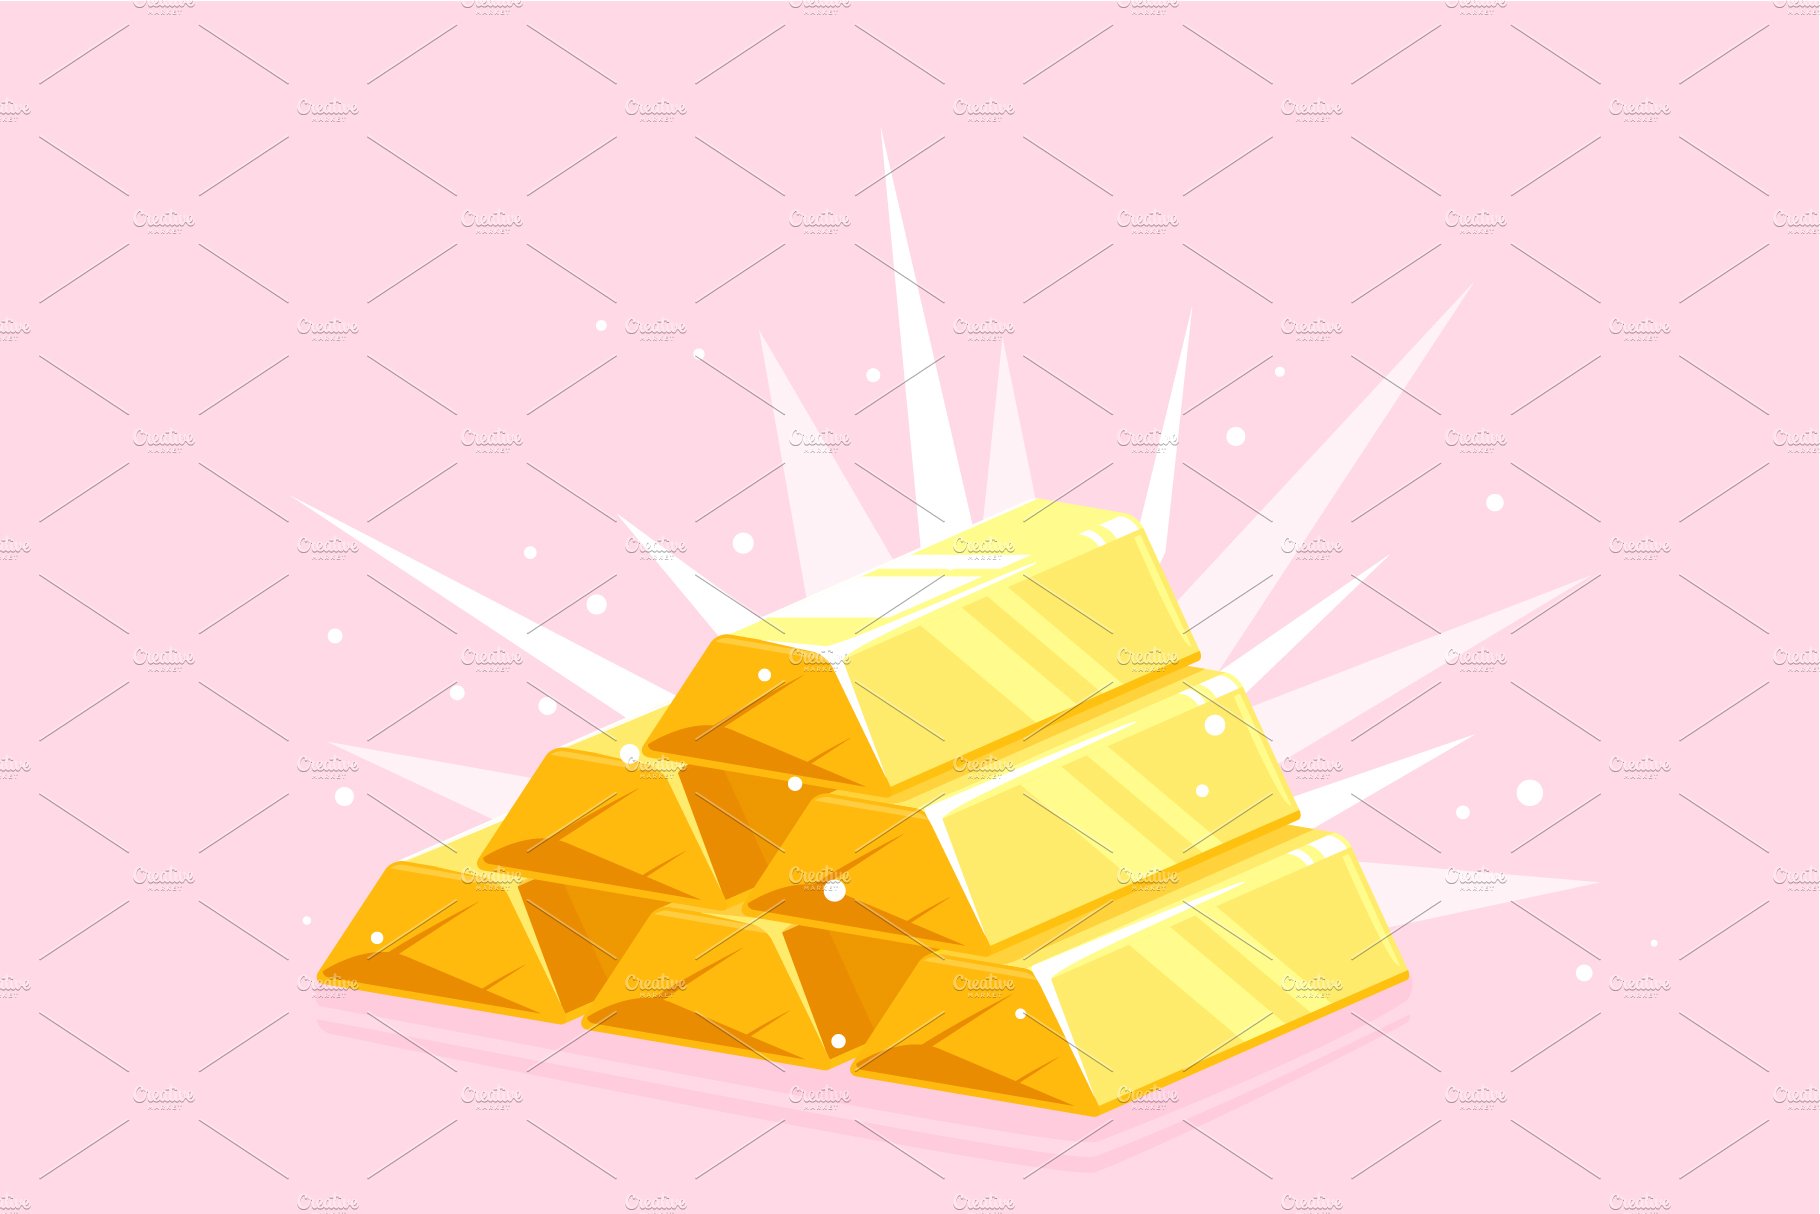 A pile of gold bars on a pink background.